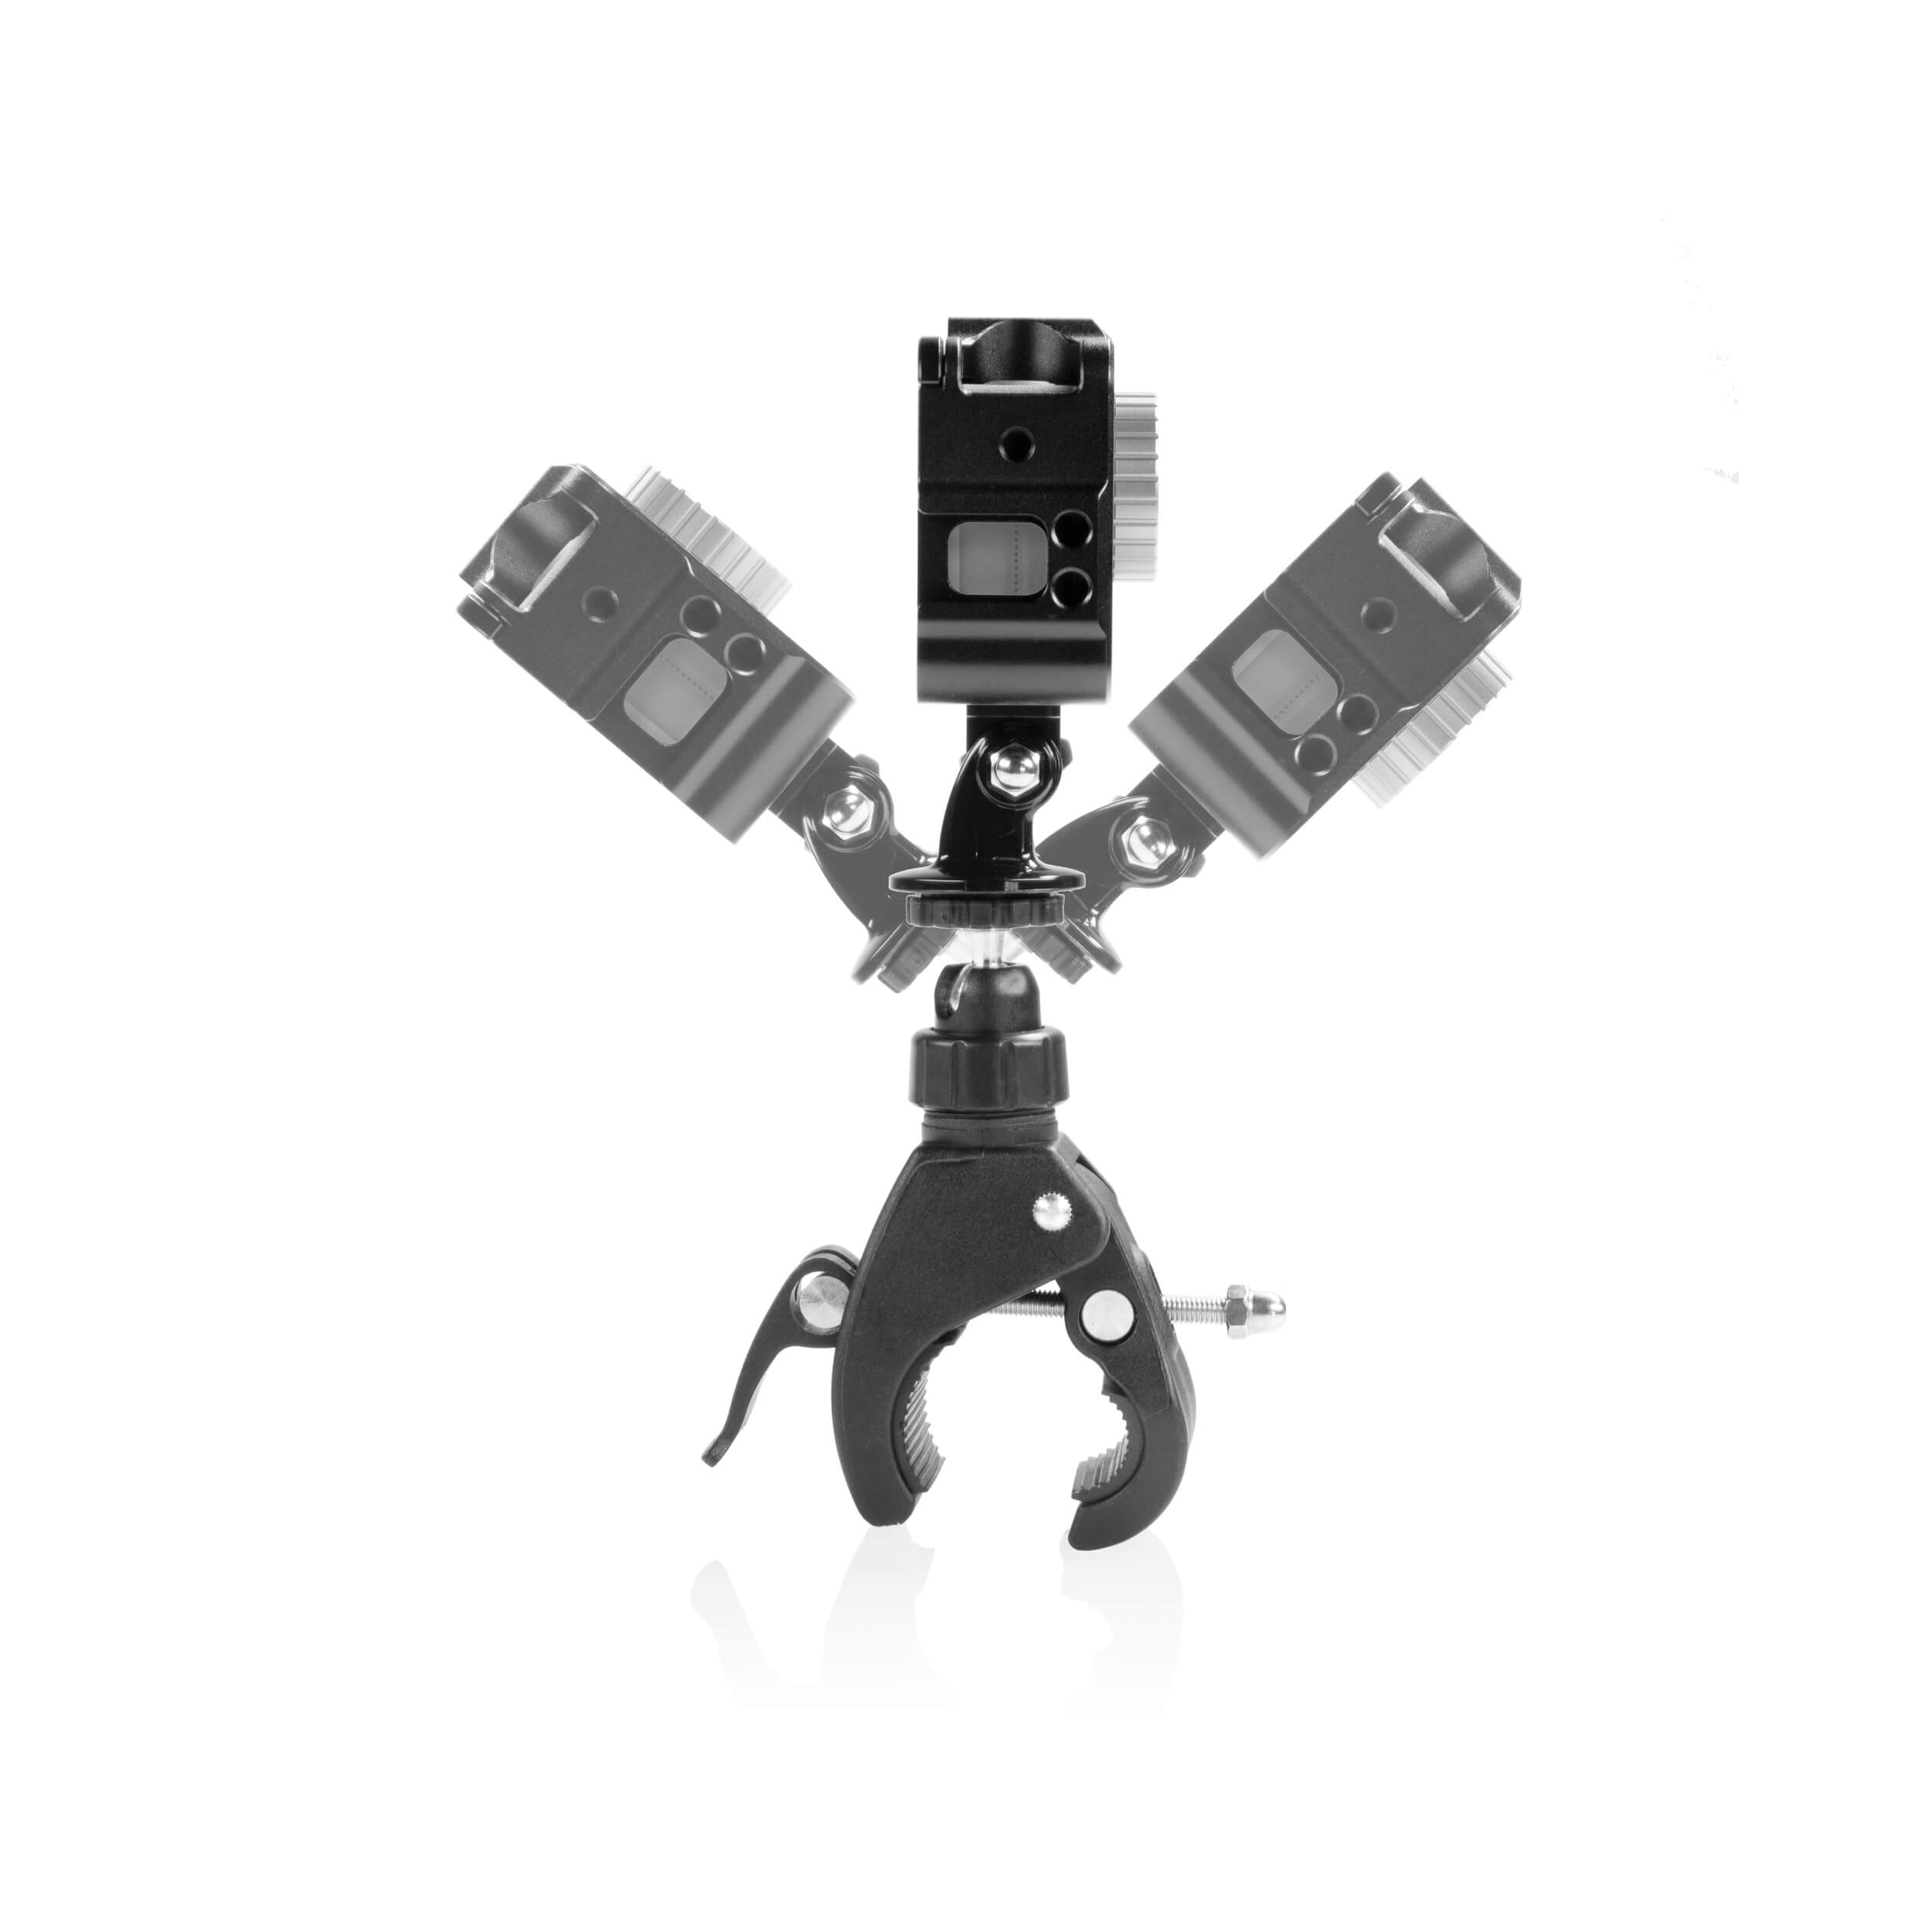 SHAPE Cage with Bike Mount Clamp for DJI Osmo Action Camera